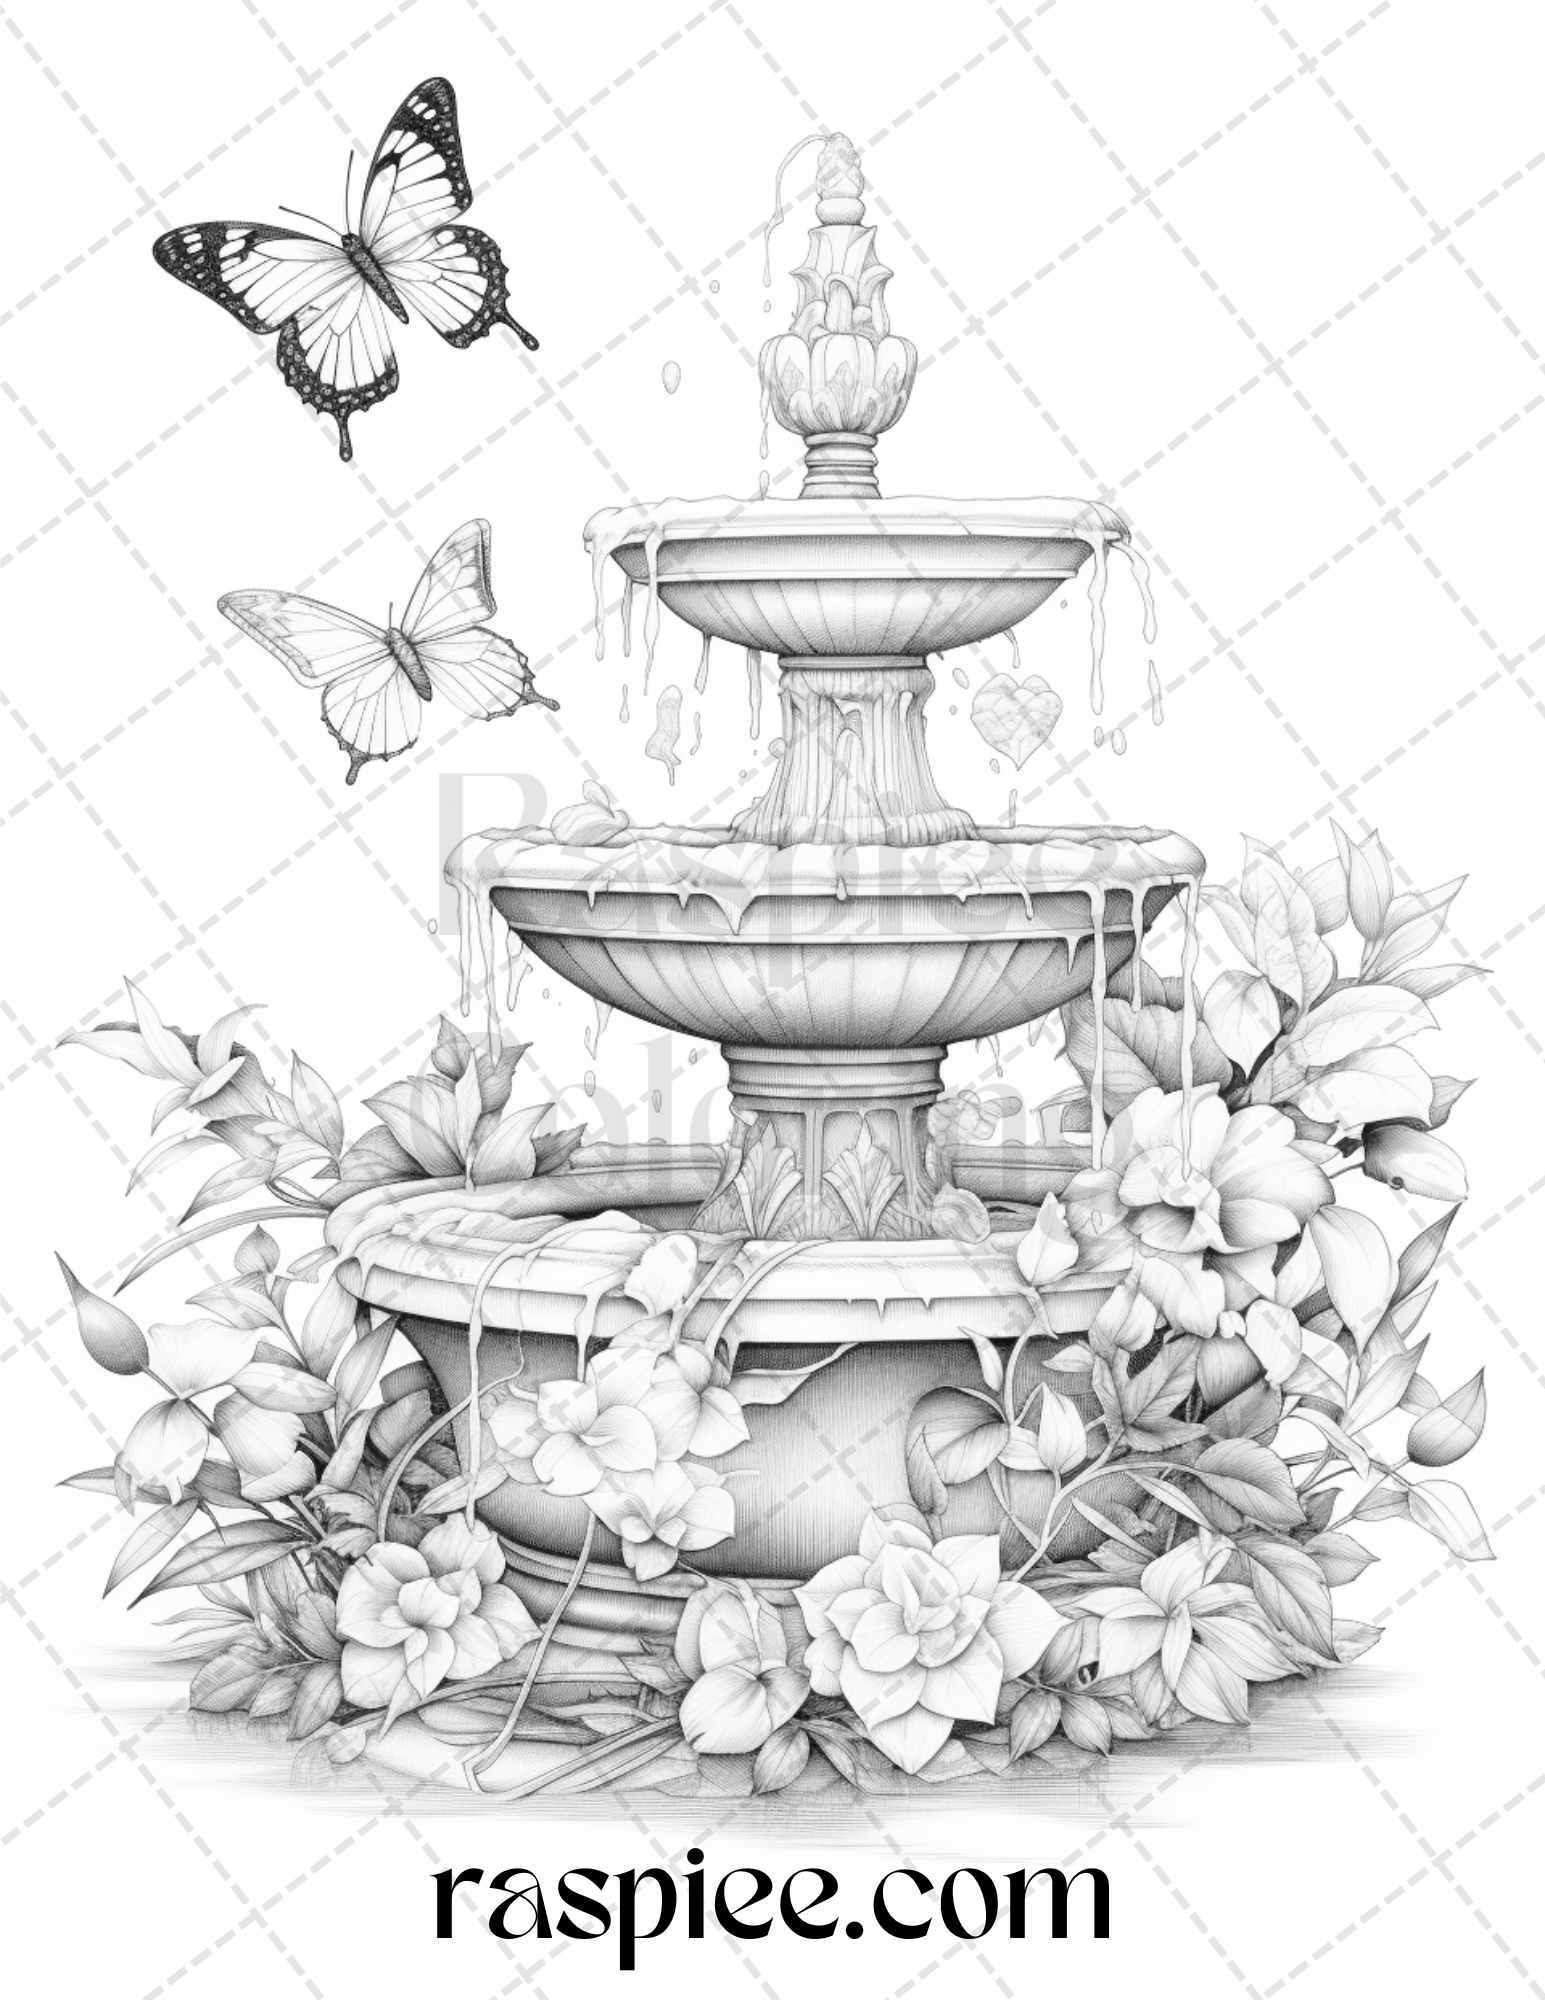 32 Blooming Fountains Grayscale Coloring Pages Printable for Adults, PDF File Instant Download - raspiee